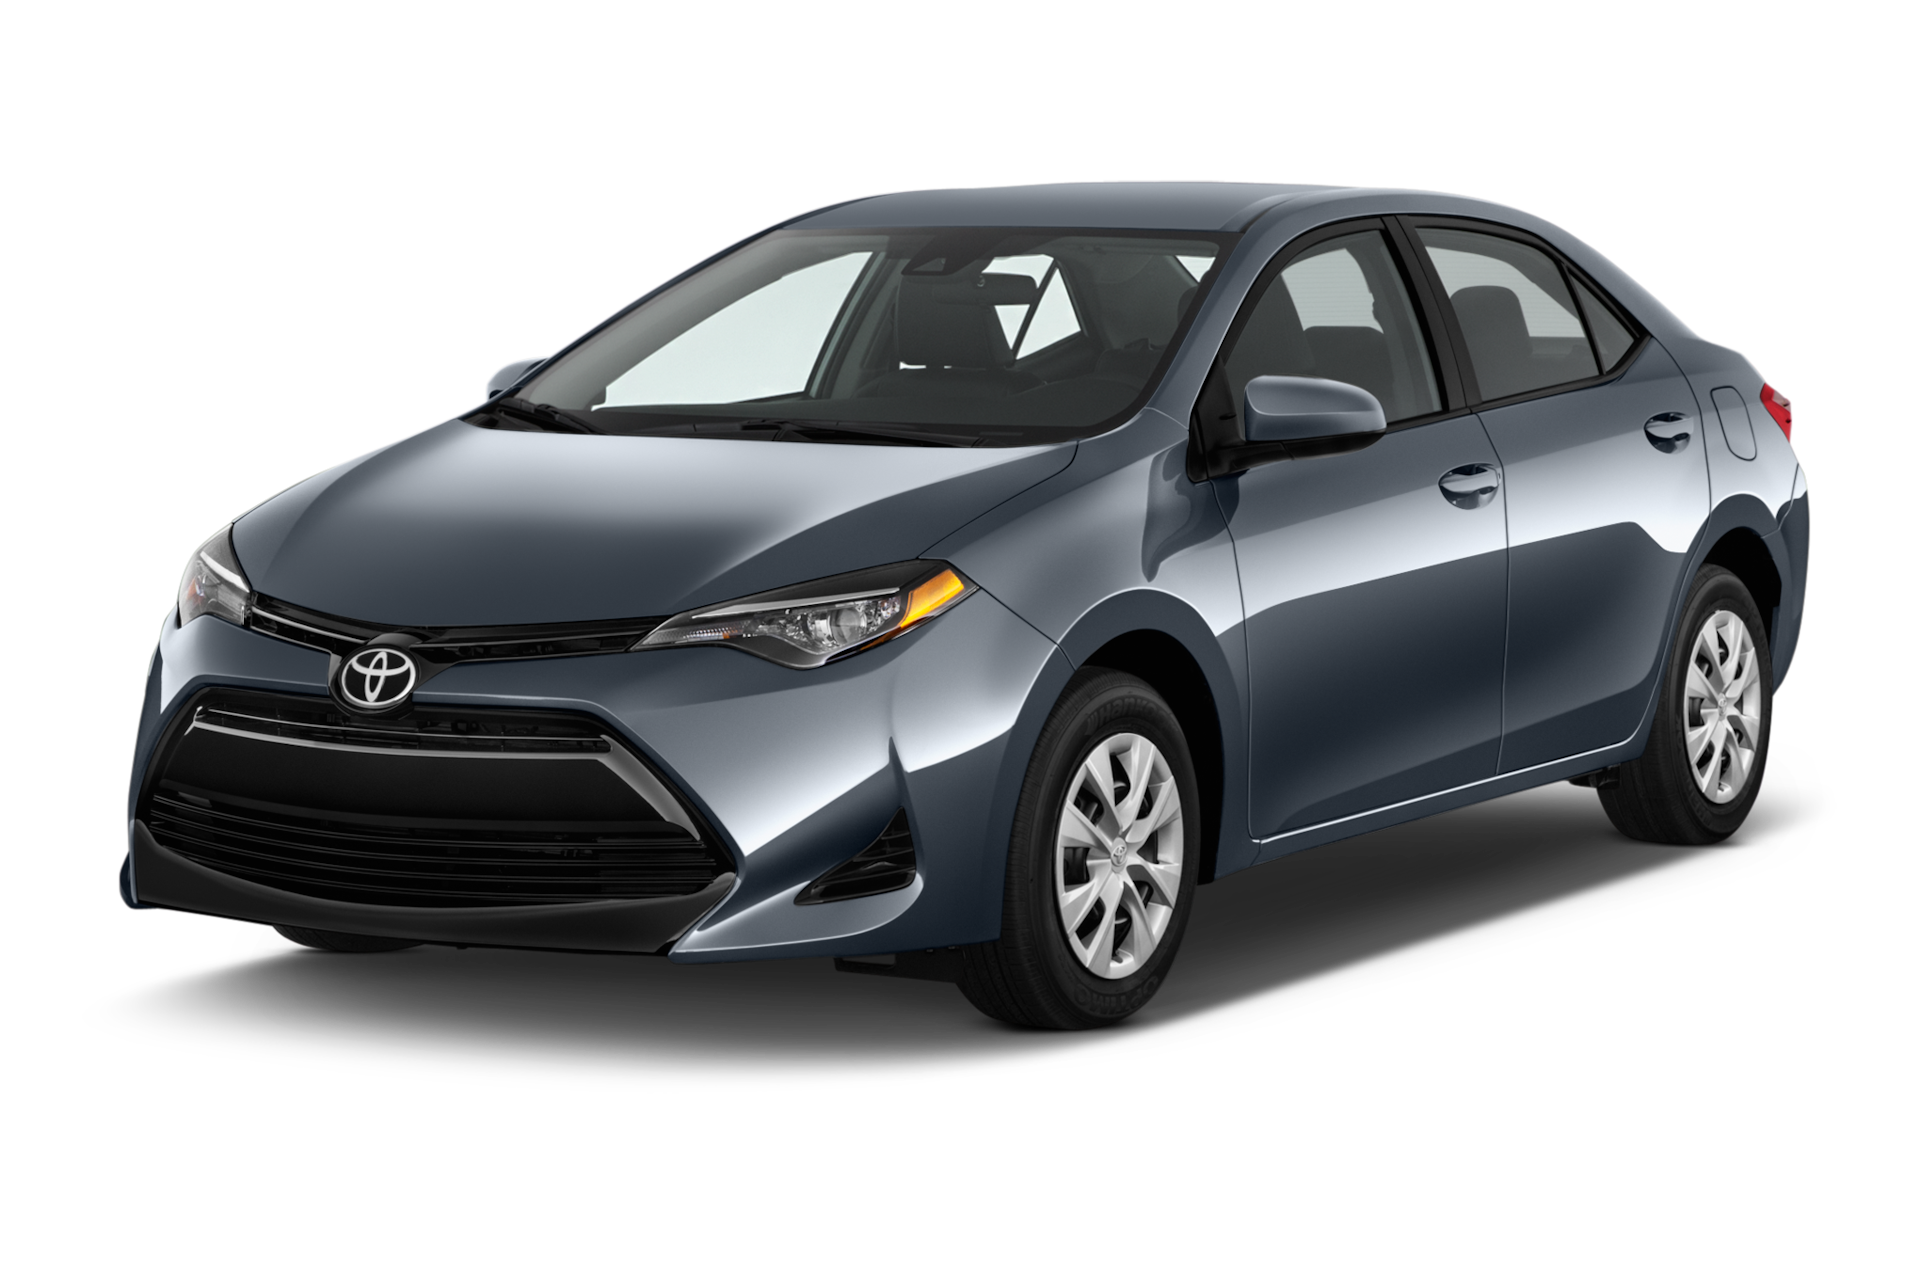 2018 Toyota Corolla Prices, Reviews, and Photos - MotorTrend